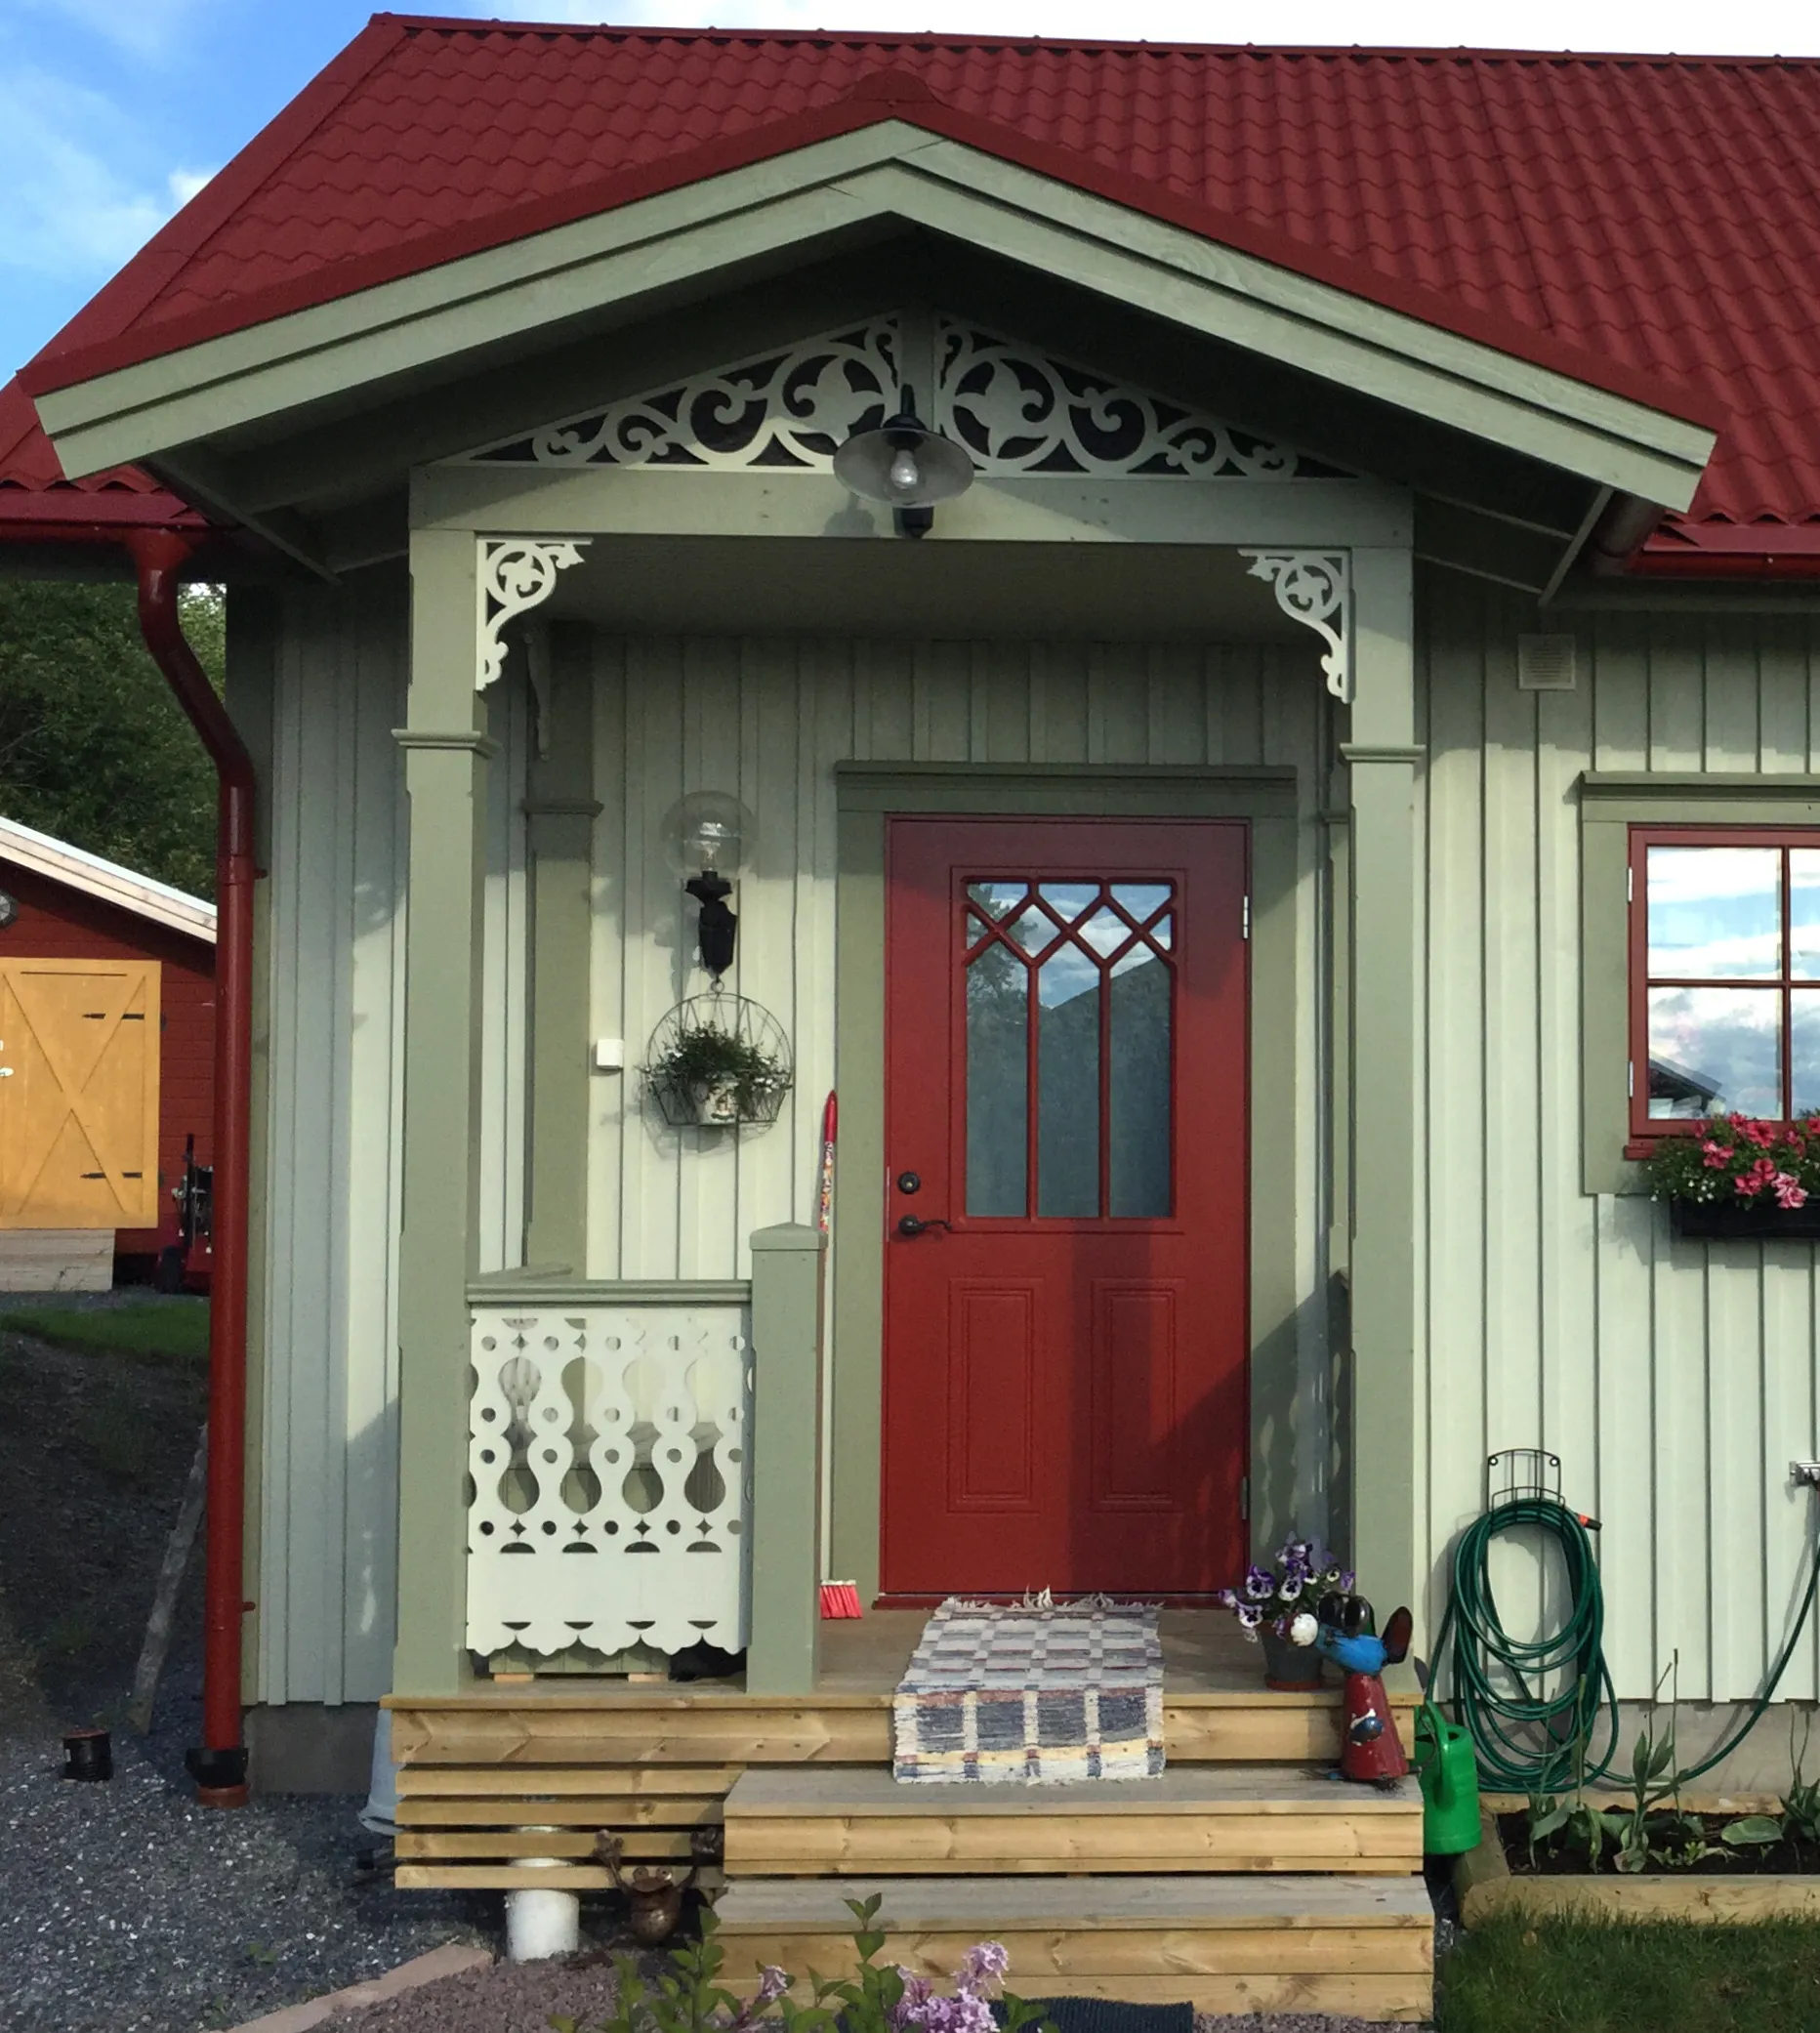 A porch inspired by the turn of the century and the 19th century - House decoration and decoration for the roof ridge - made in Sweden - unique design.